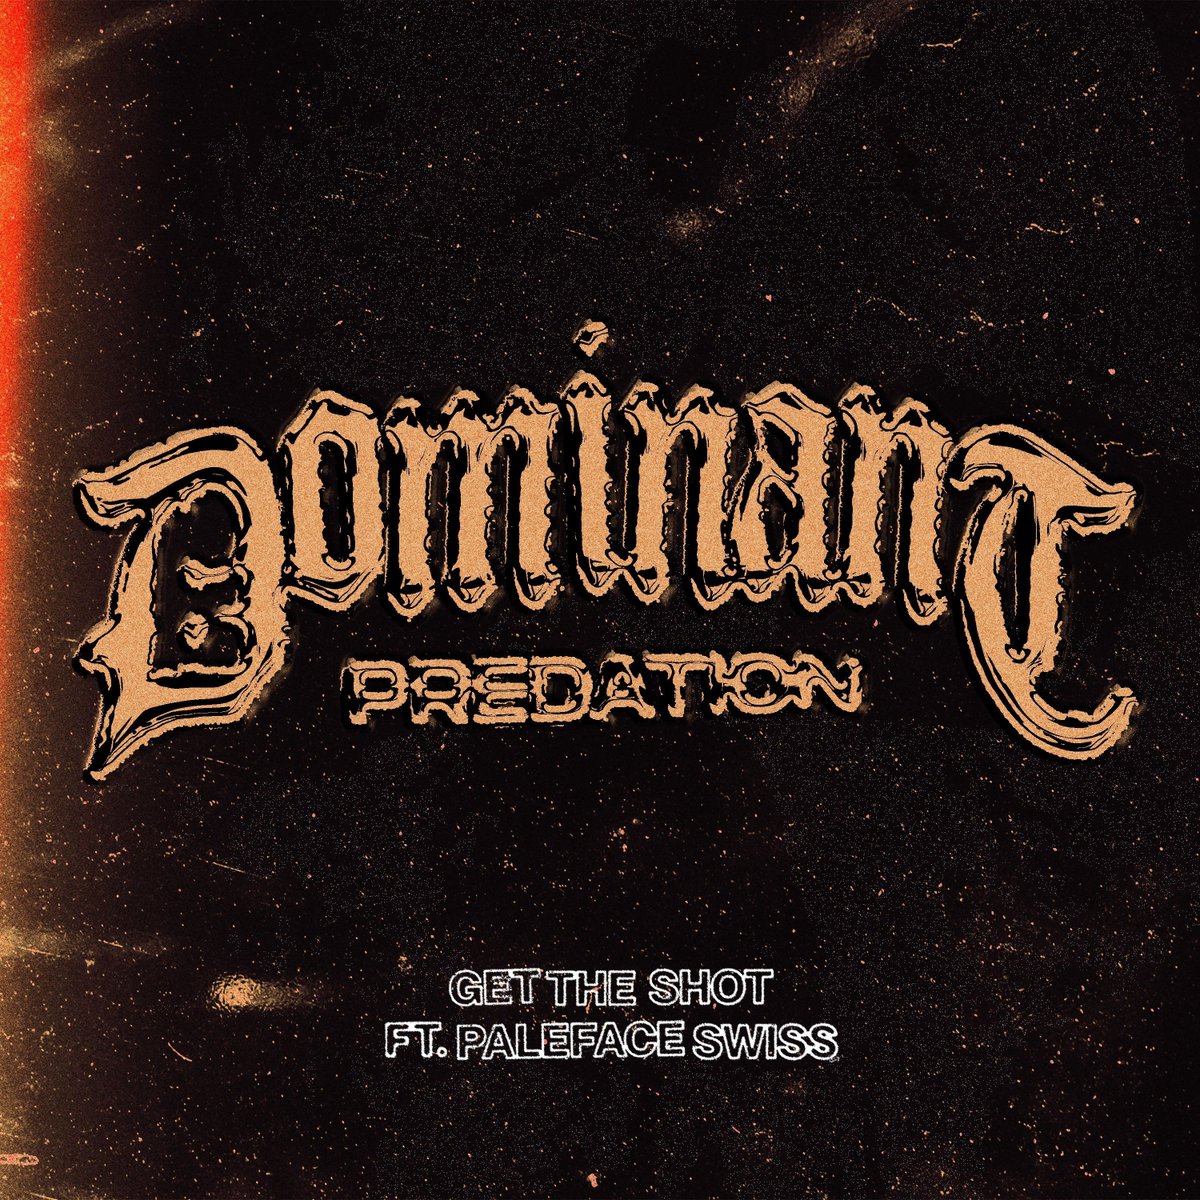 Get the Shot will be releasing their new single 'Dominant Predation (feat. Paleface Swiss)' tonight @ midnight